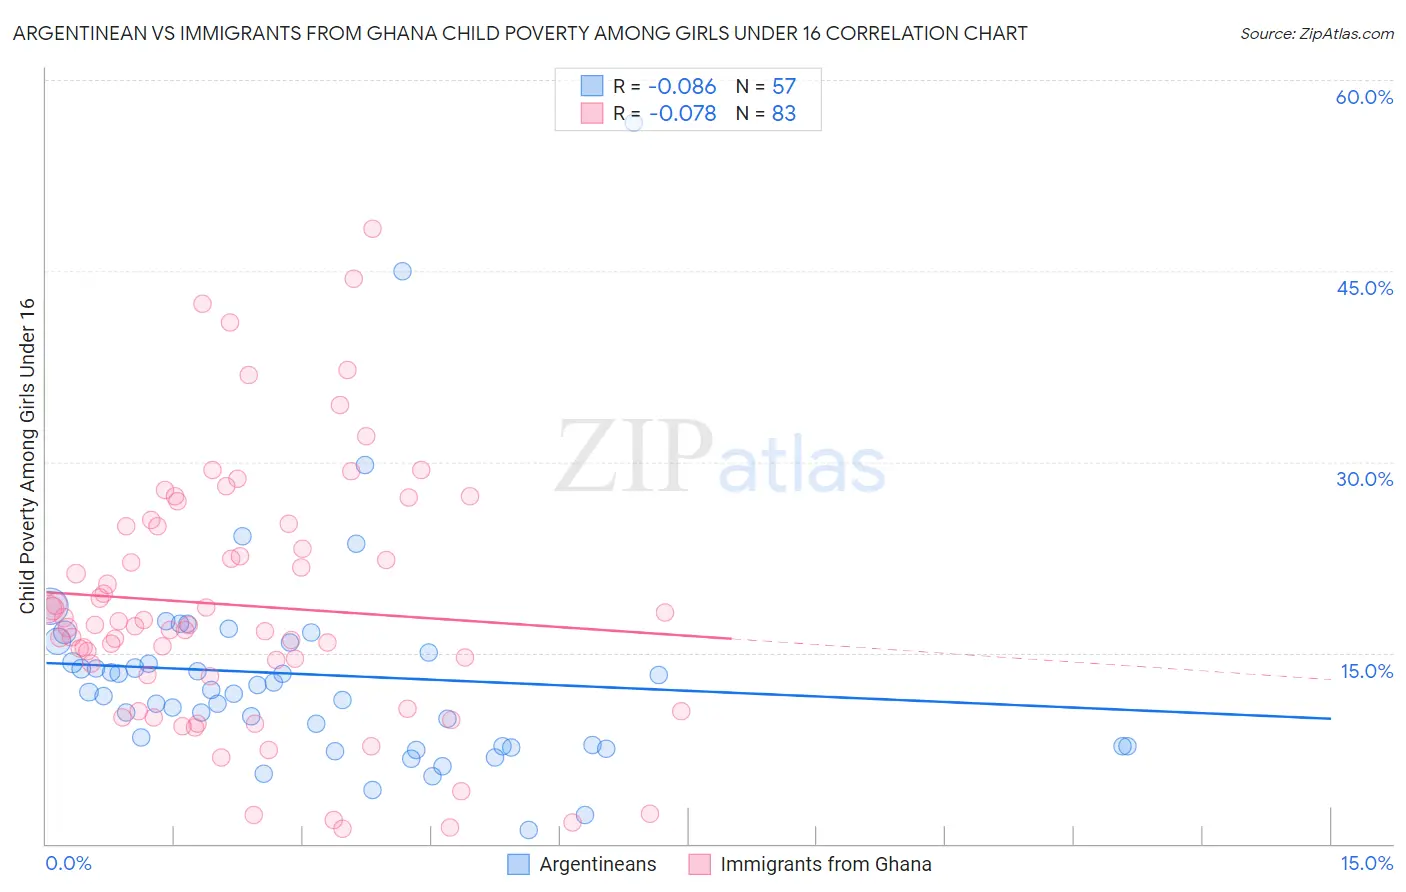 Argentinean vs Immigrants from Ghana Child Poverty Among Girls Under 16